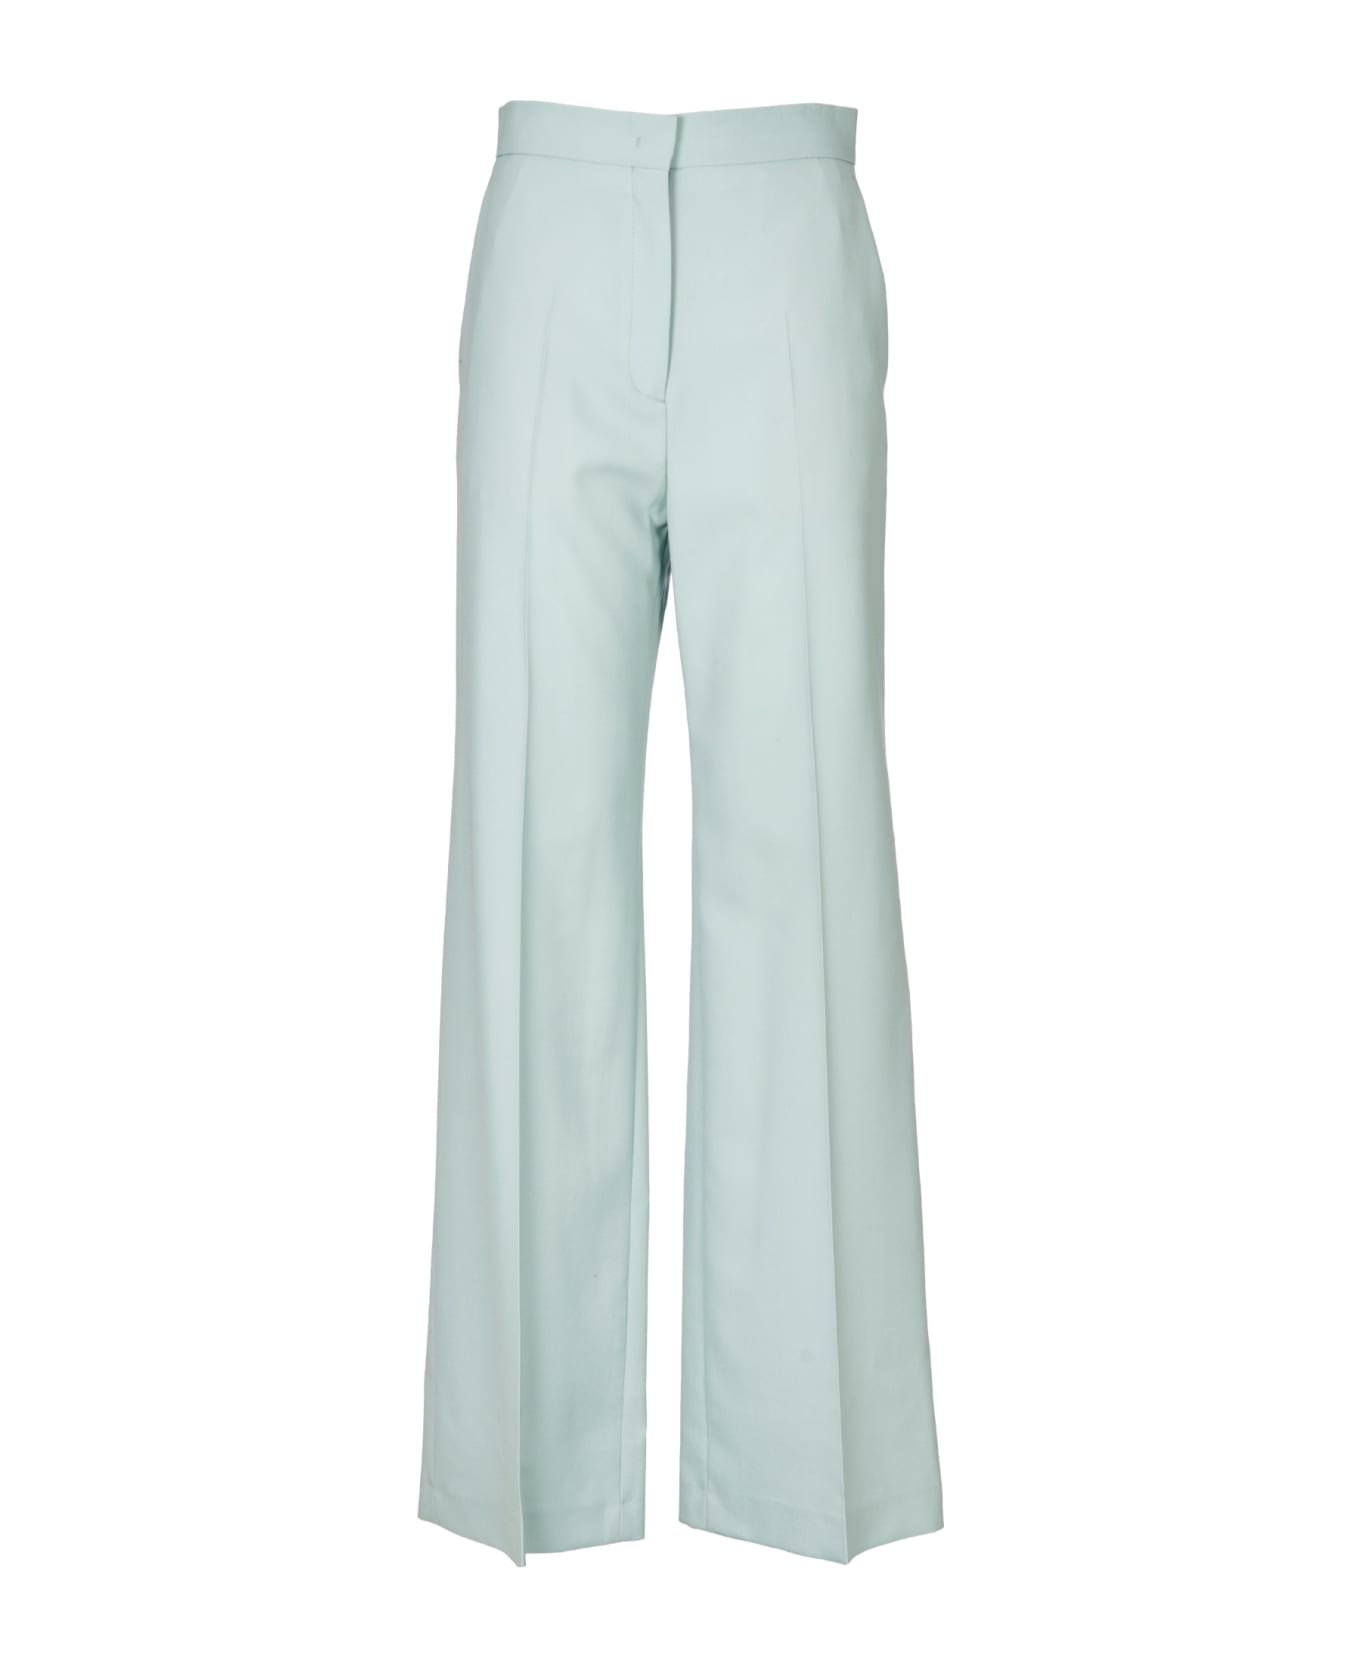 Paul Smith Trousers - Water Green ボトムス